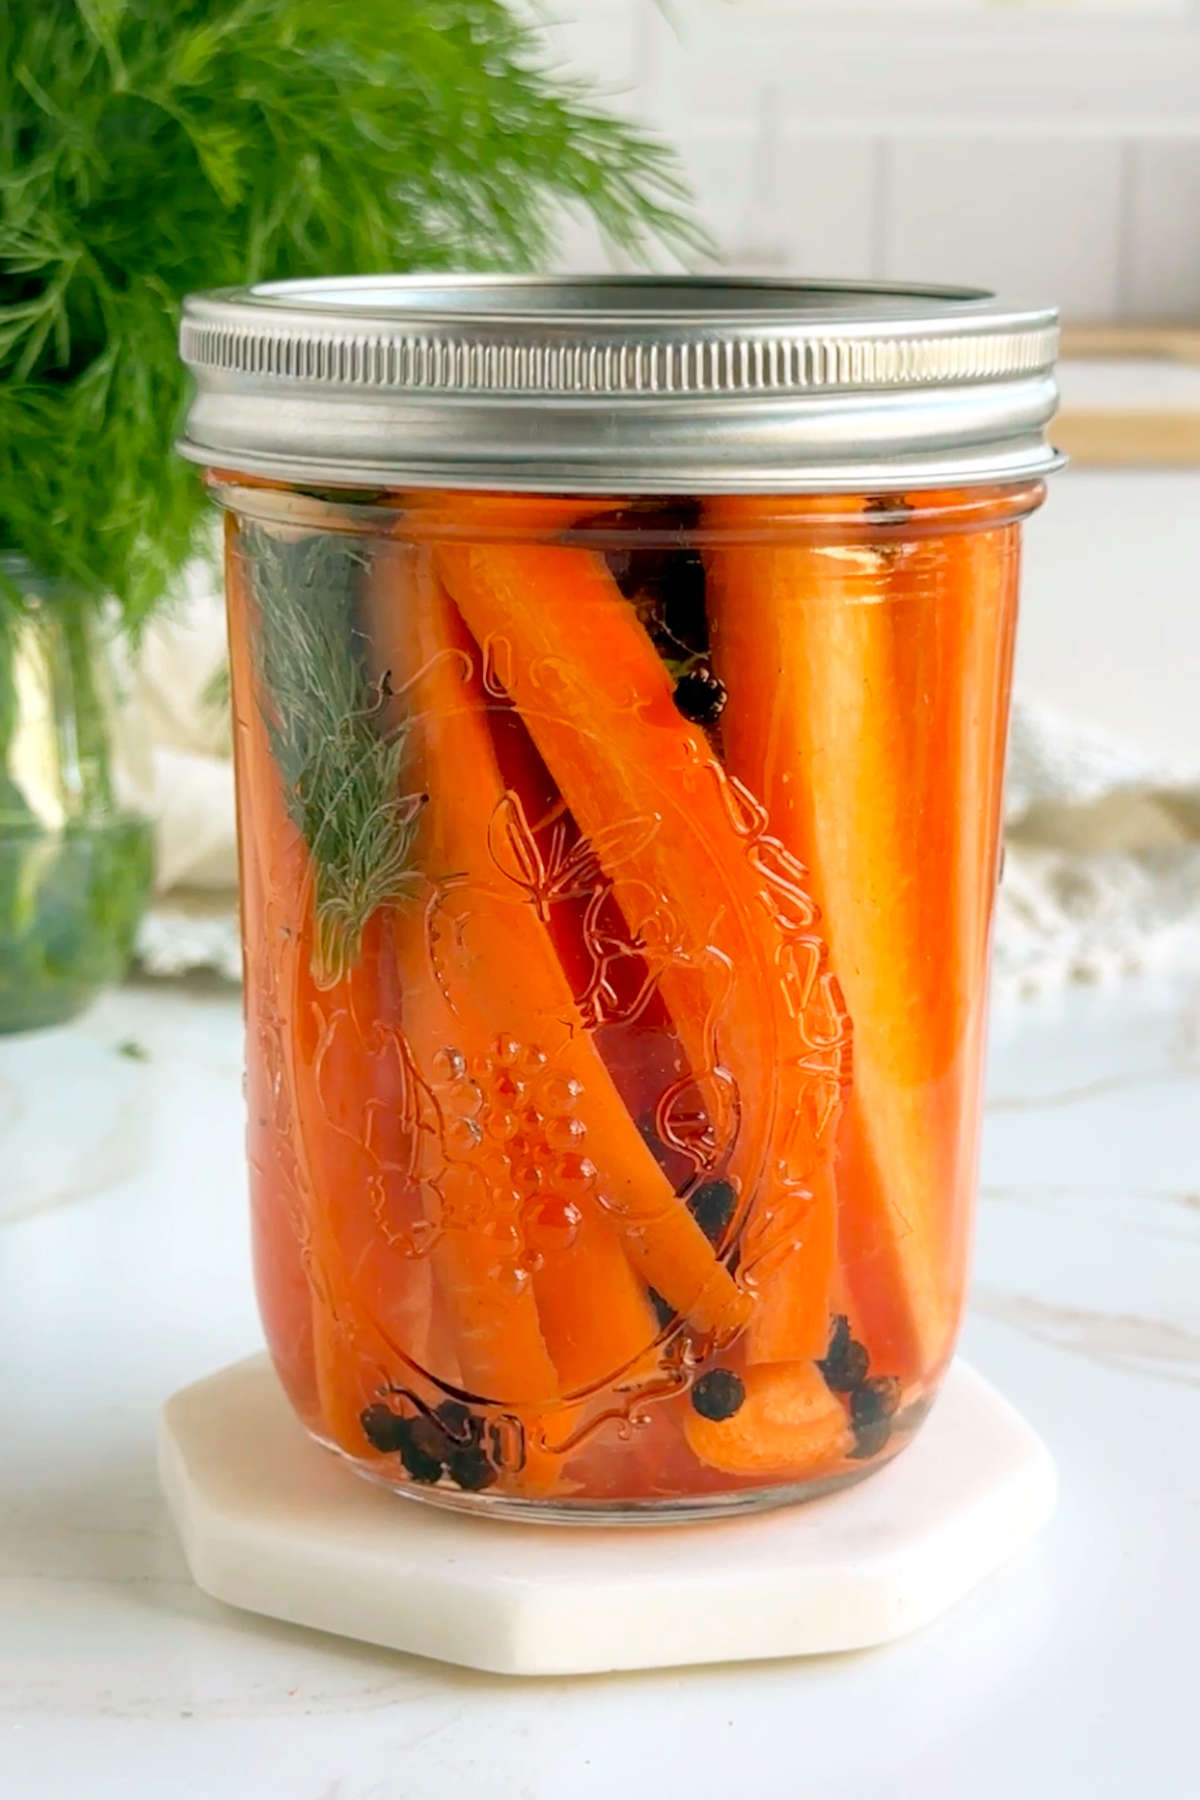 The pickled carrots in a sealed glass jar after adding the pickling brine.